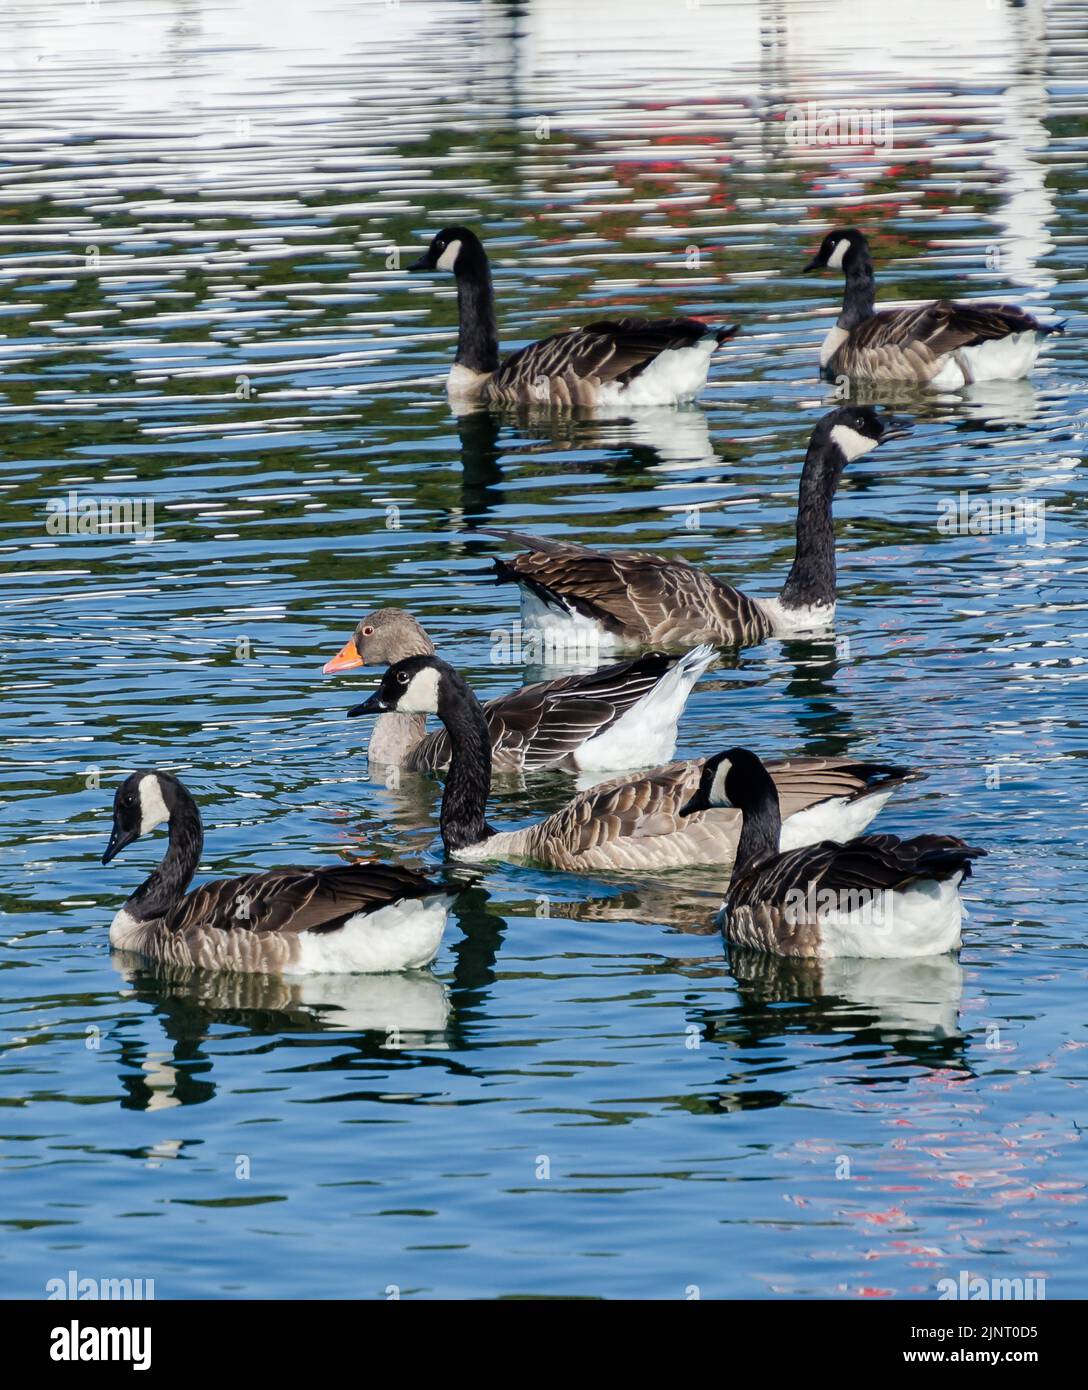 Canada geese on a summer lake Stock Photo